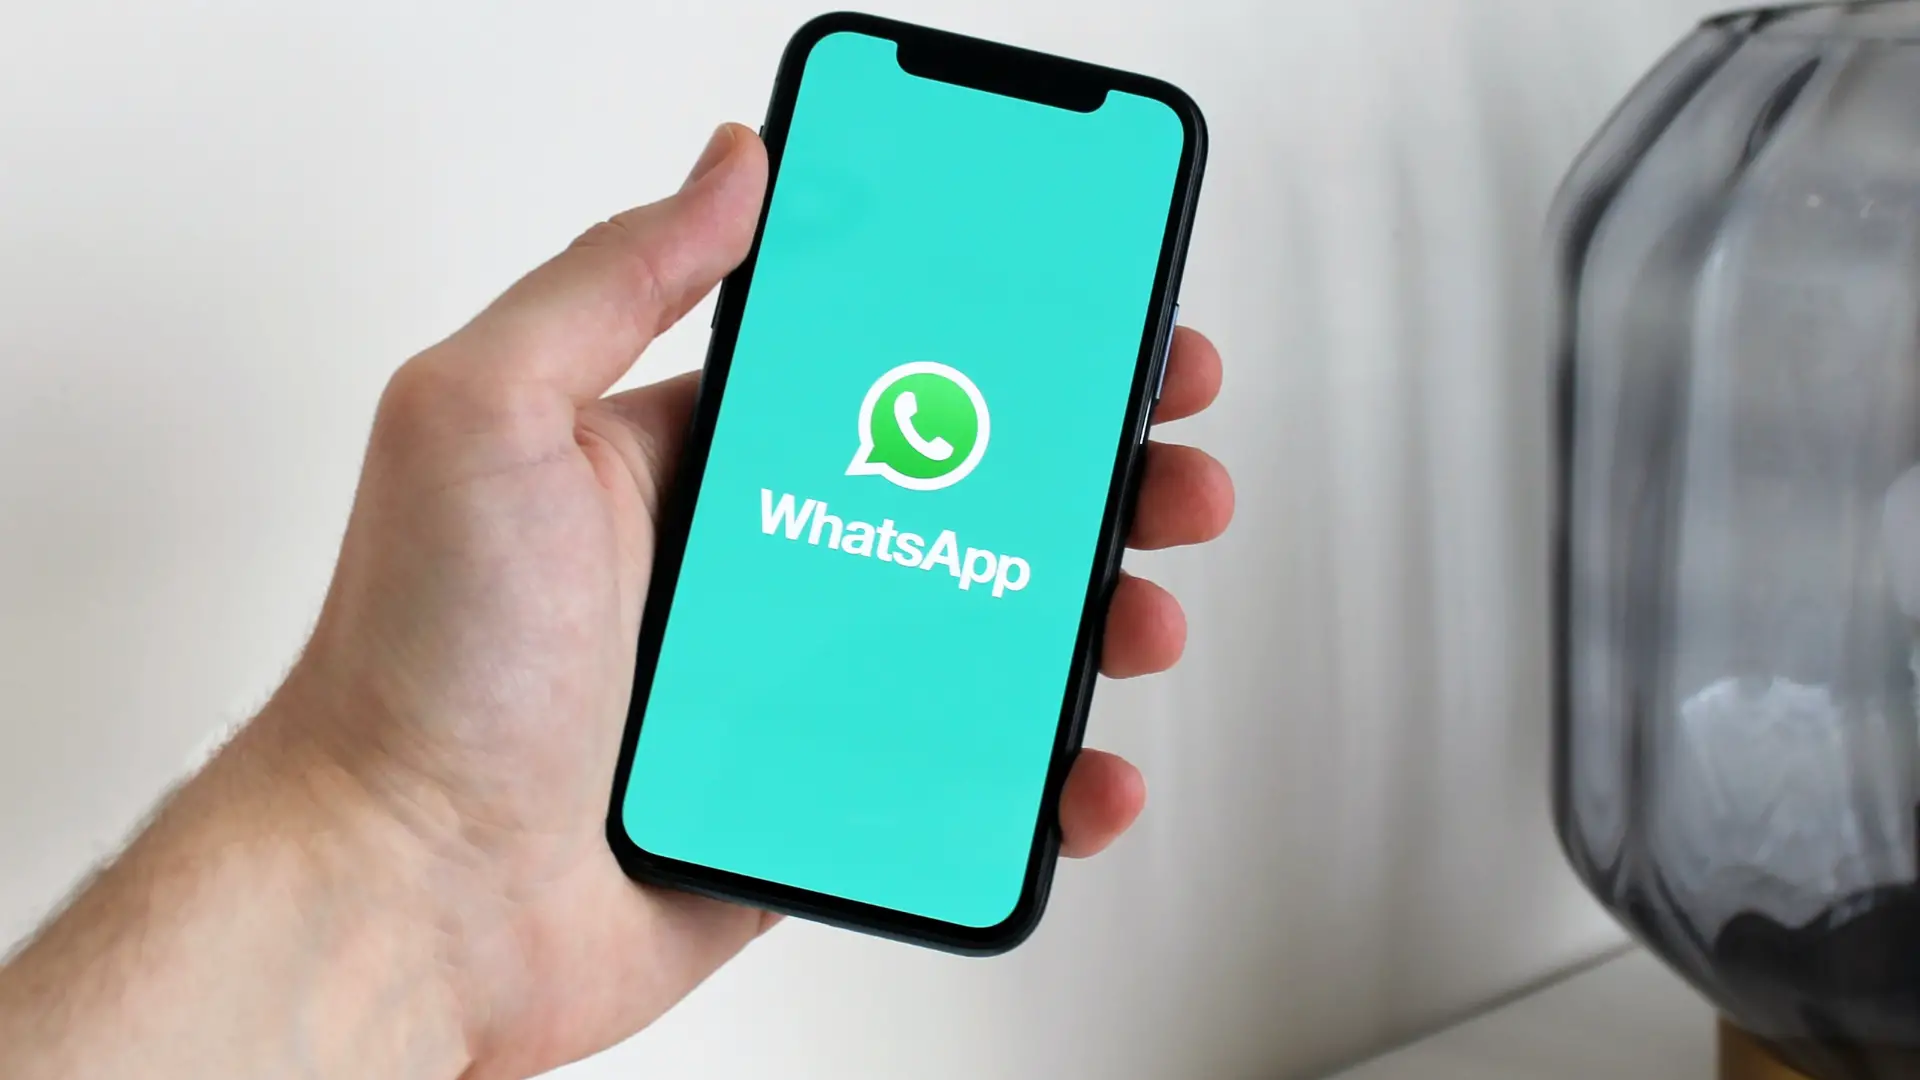 How to stop spam calls on WhatsApp